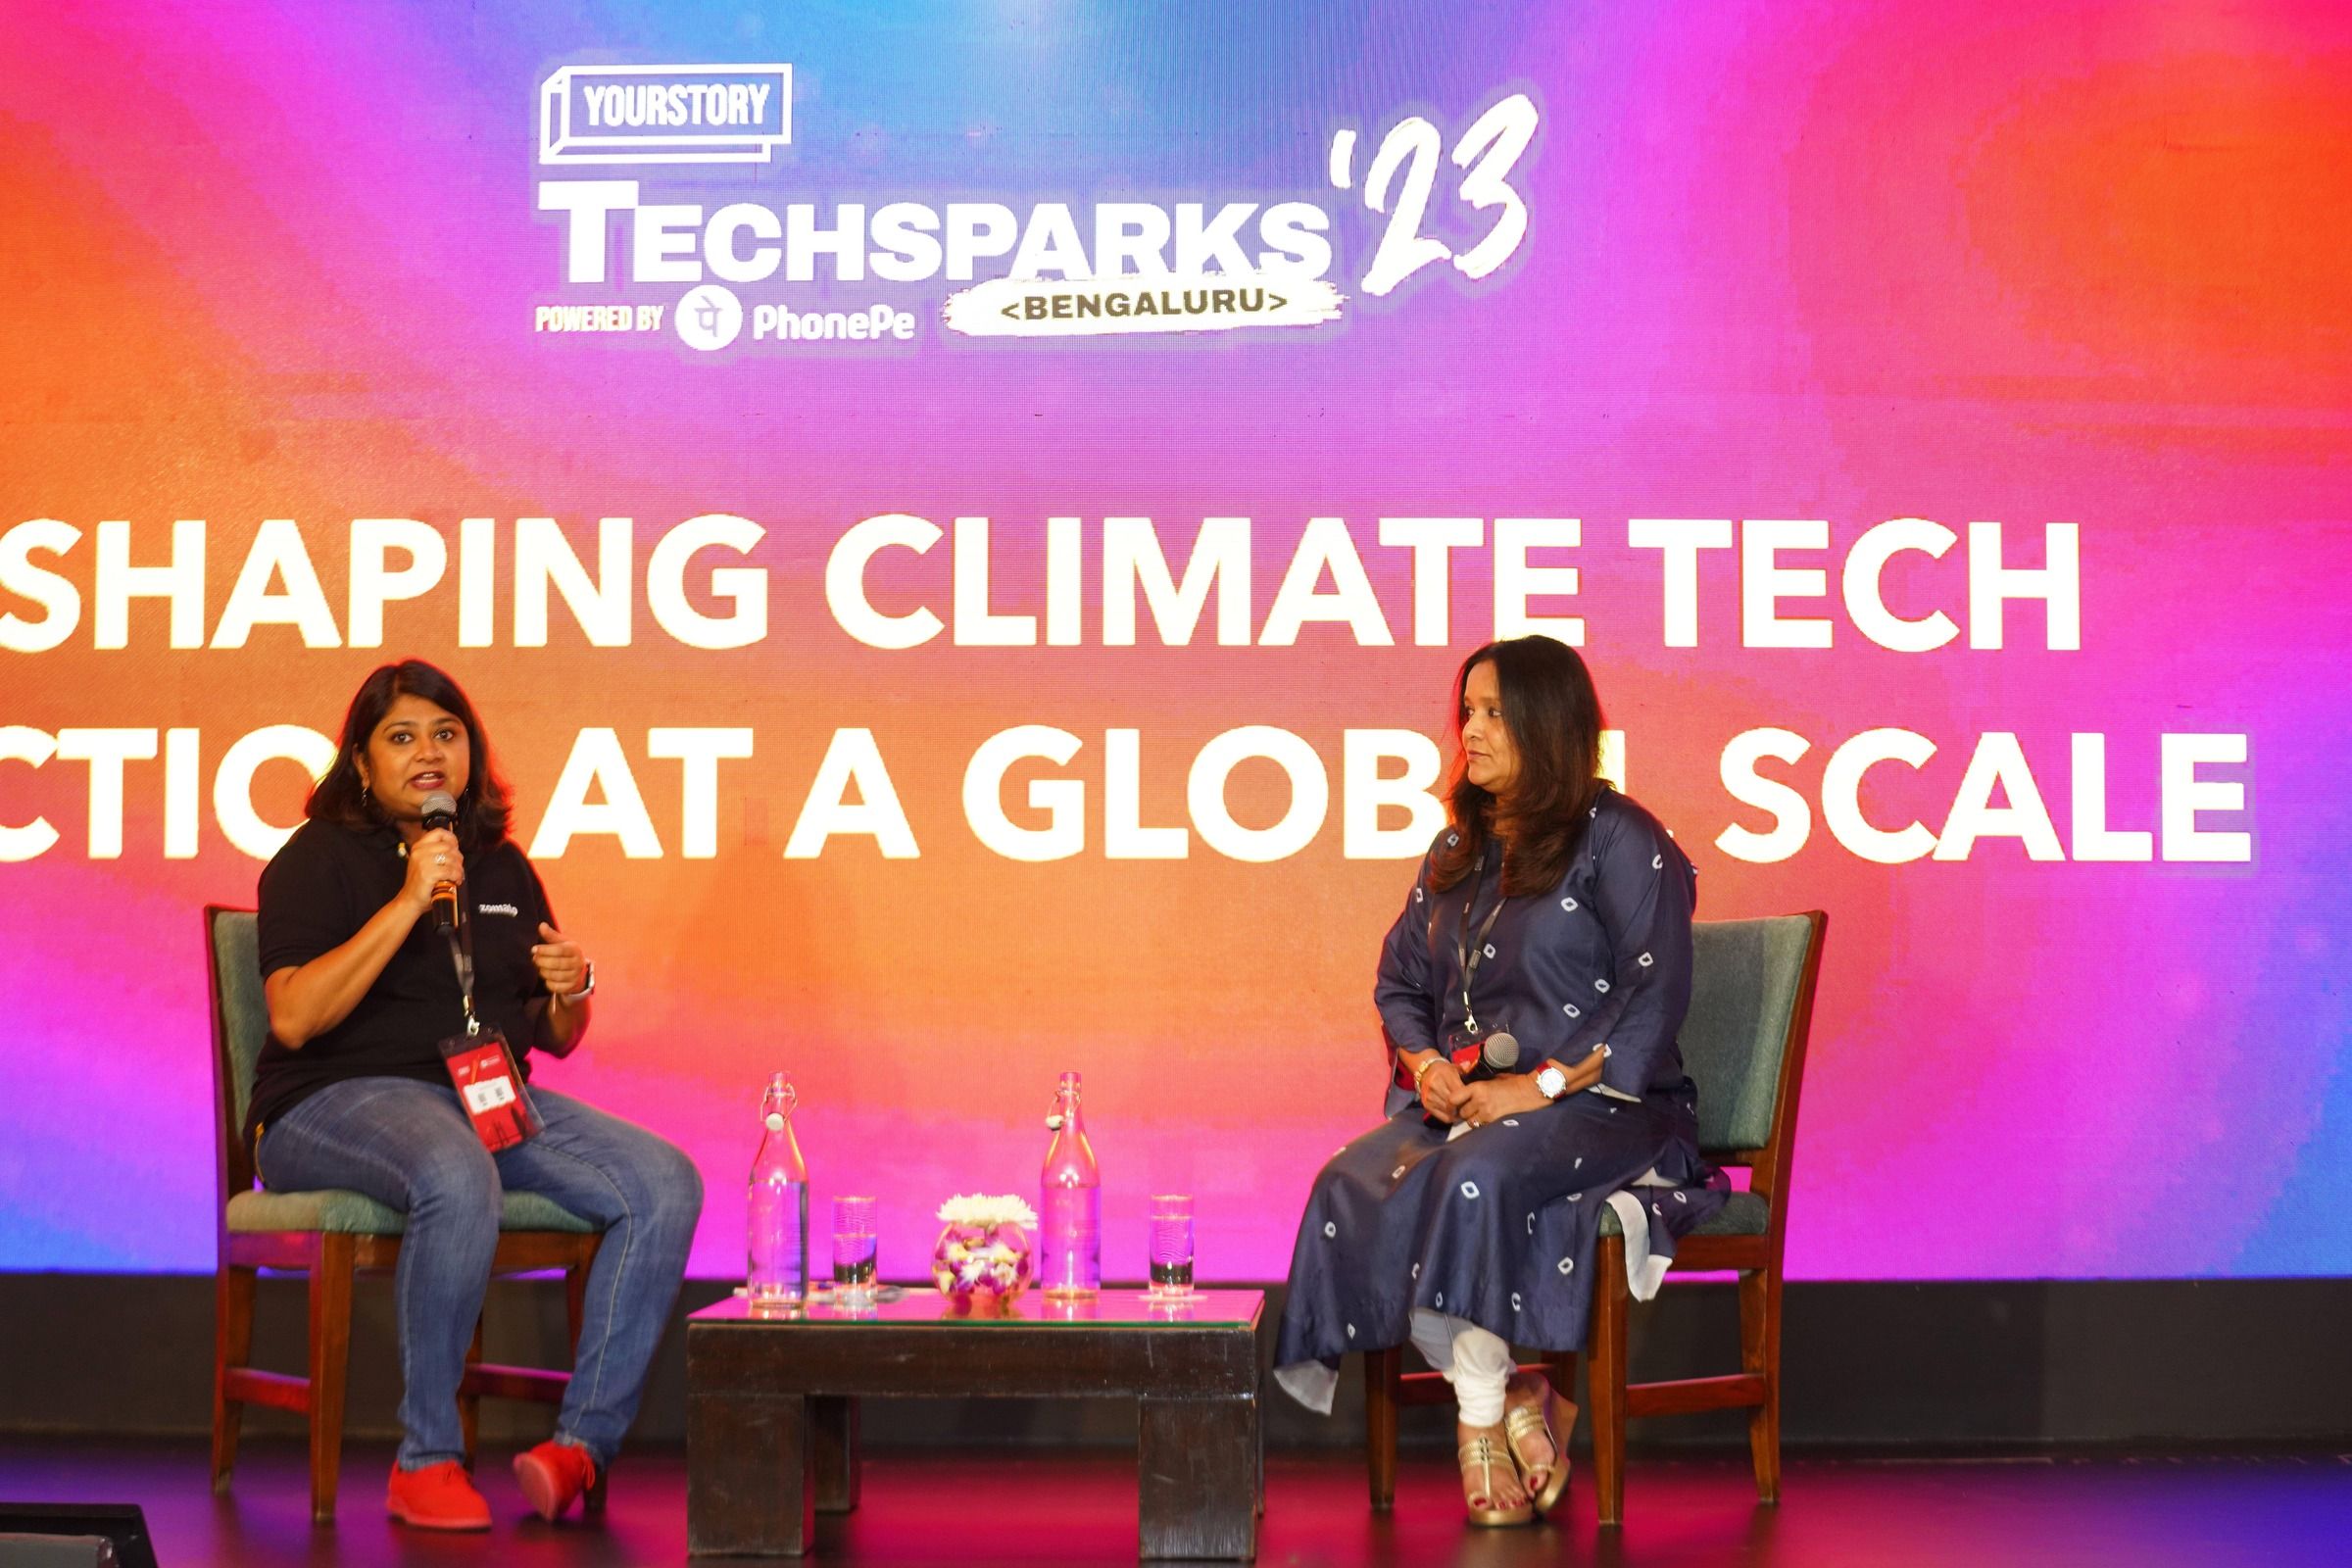 Startups must create sustainable products that are affordable too, says Zomato's chief sustainability officer 